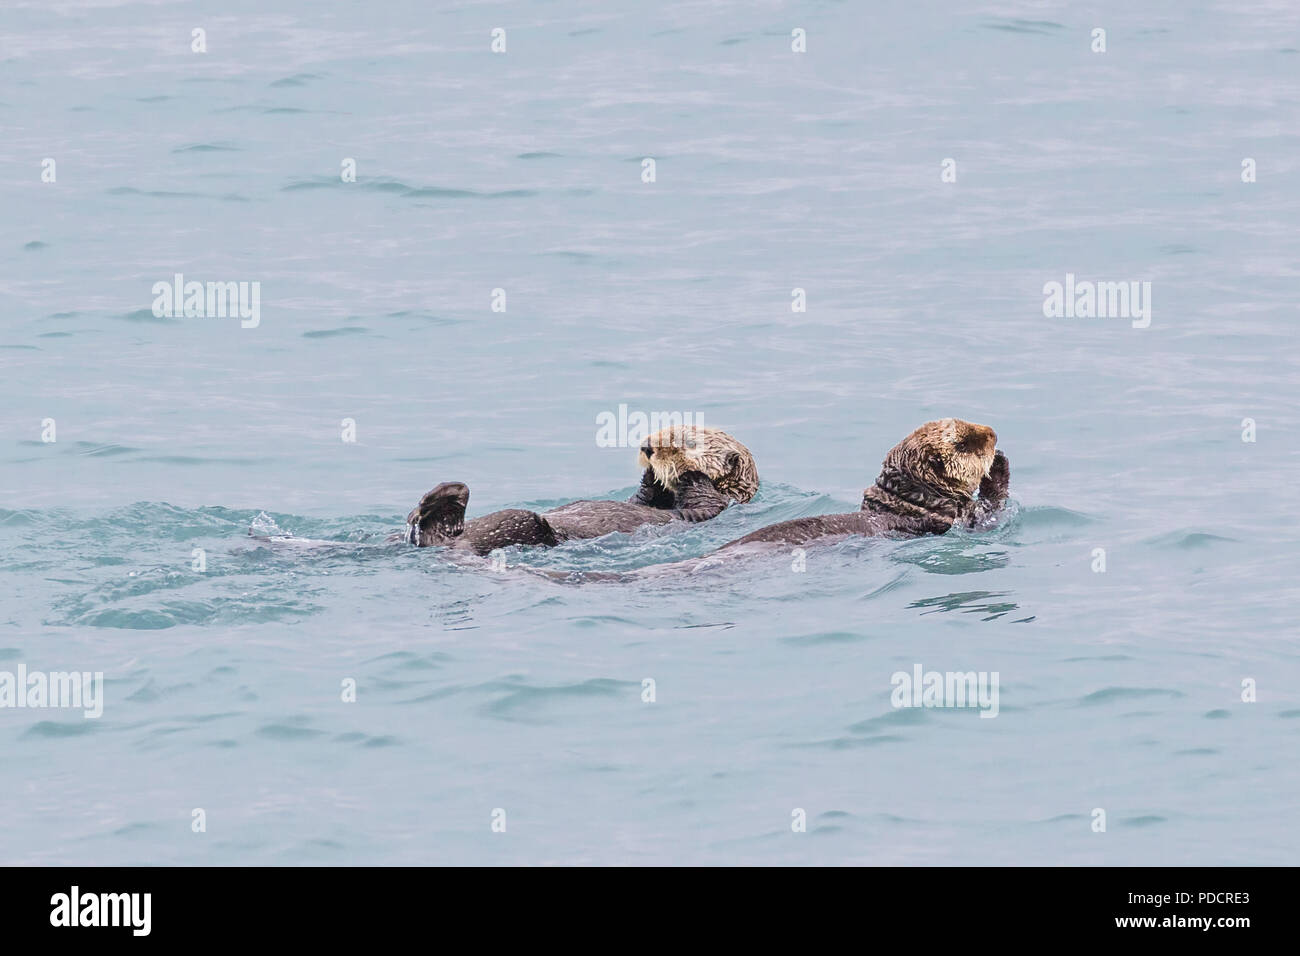 A pair of Sea Otters or Enhydra lutris in the water off Valdez Alaska Stock Photo